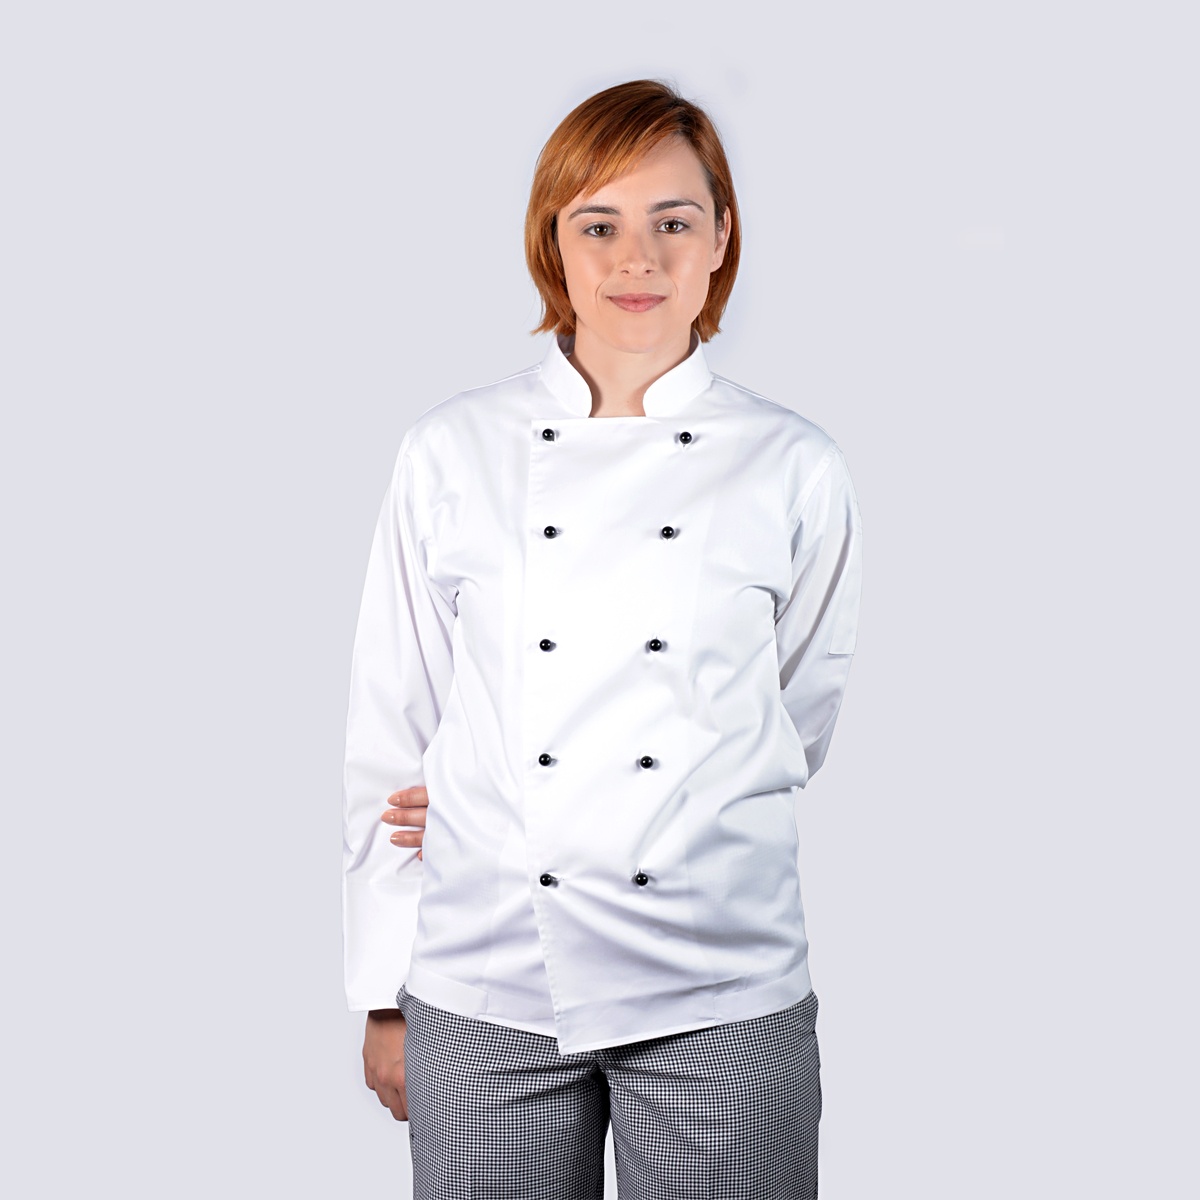 100% cotton luxurious white long sleeve chef jacket with black buttons